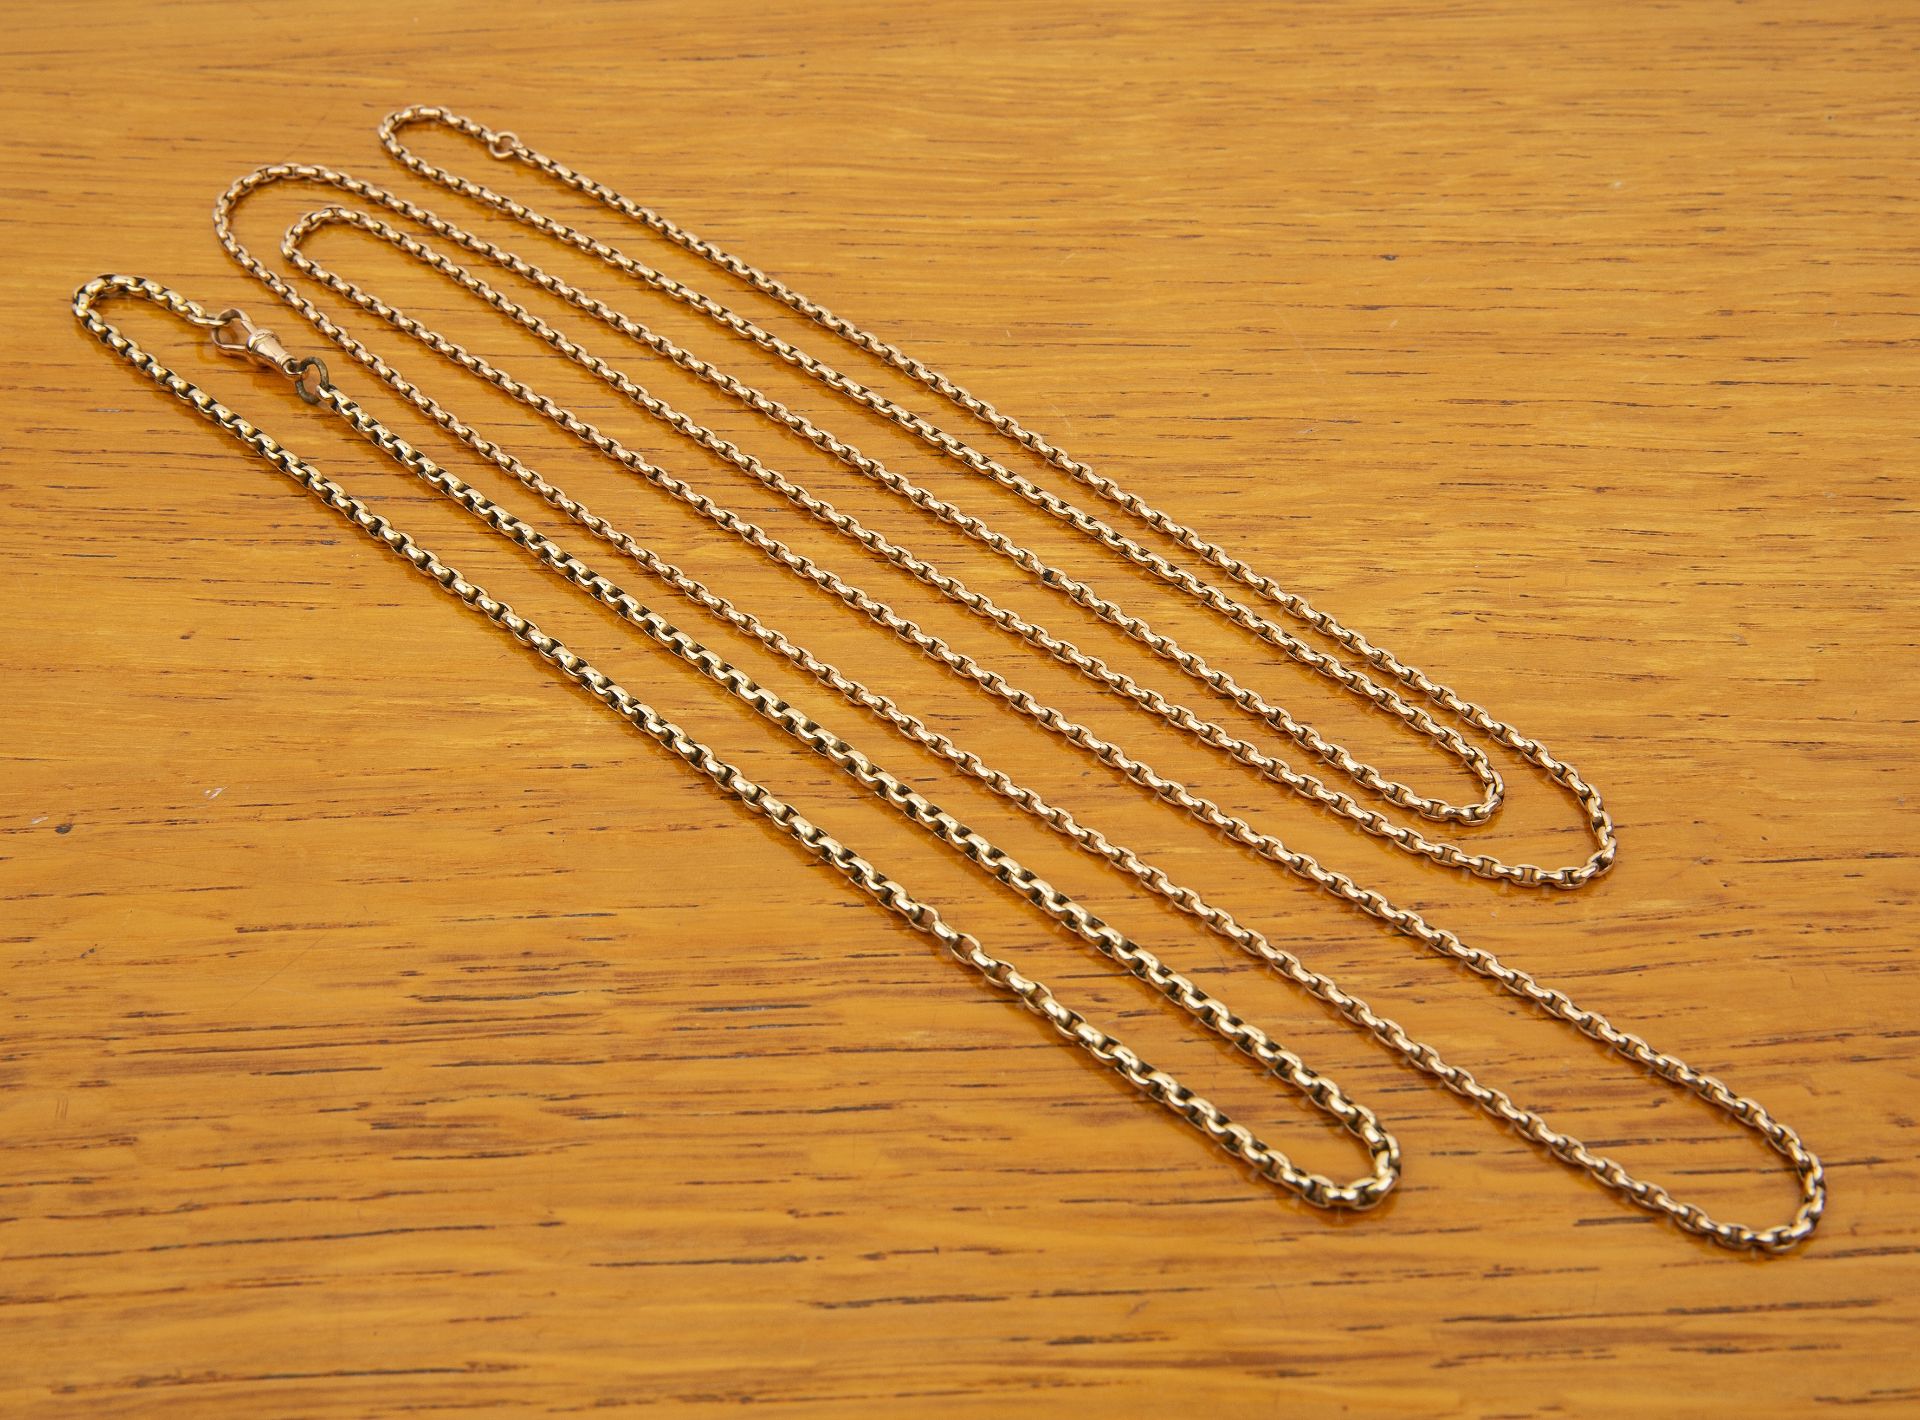 9ct yellow gold guard chain marked '9C' near the o ring, 150cm approx overall, 26g approx overall